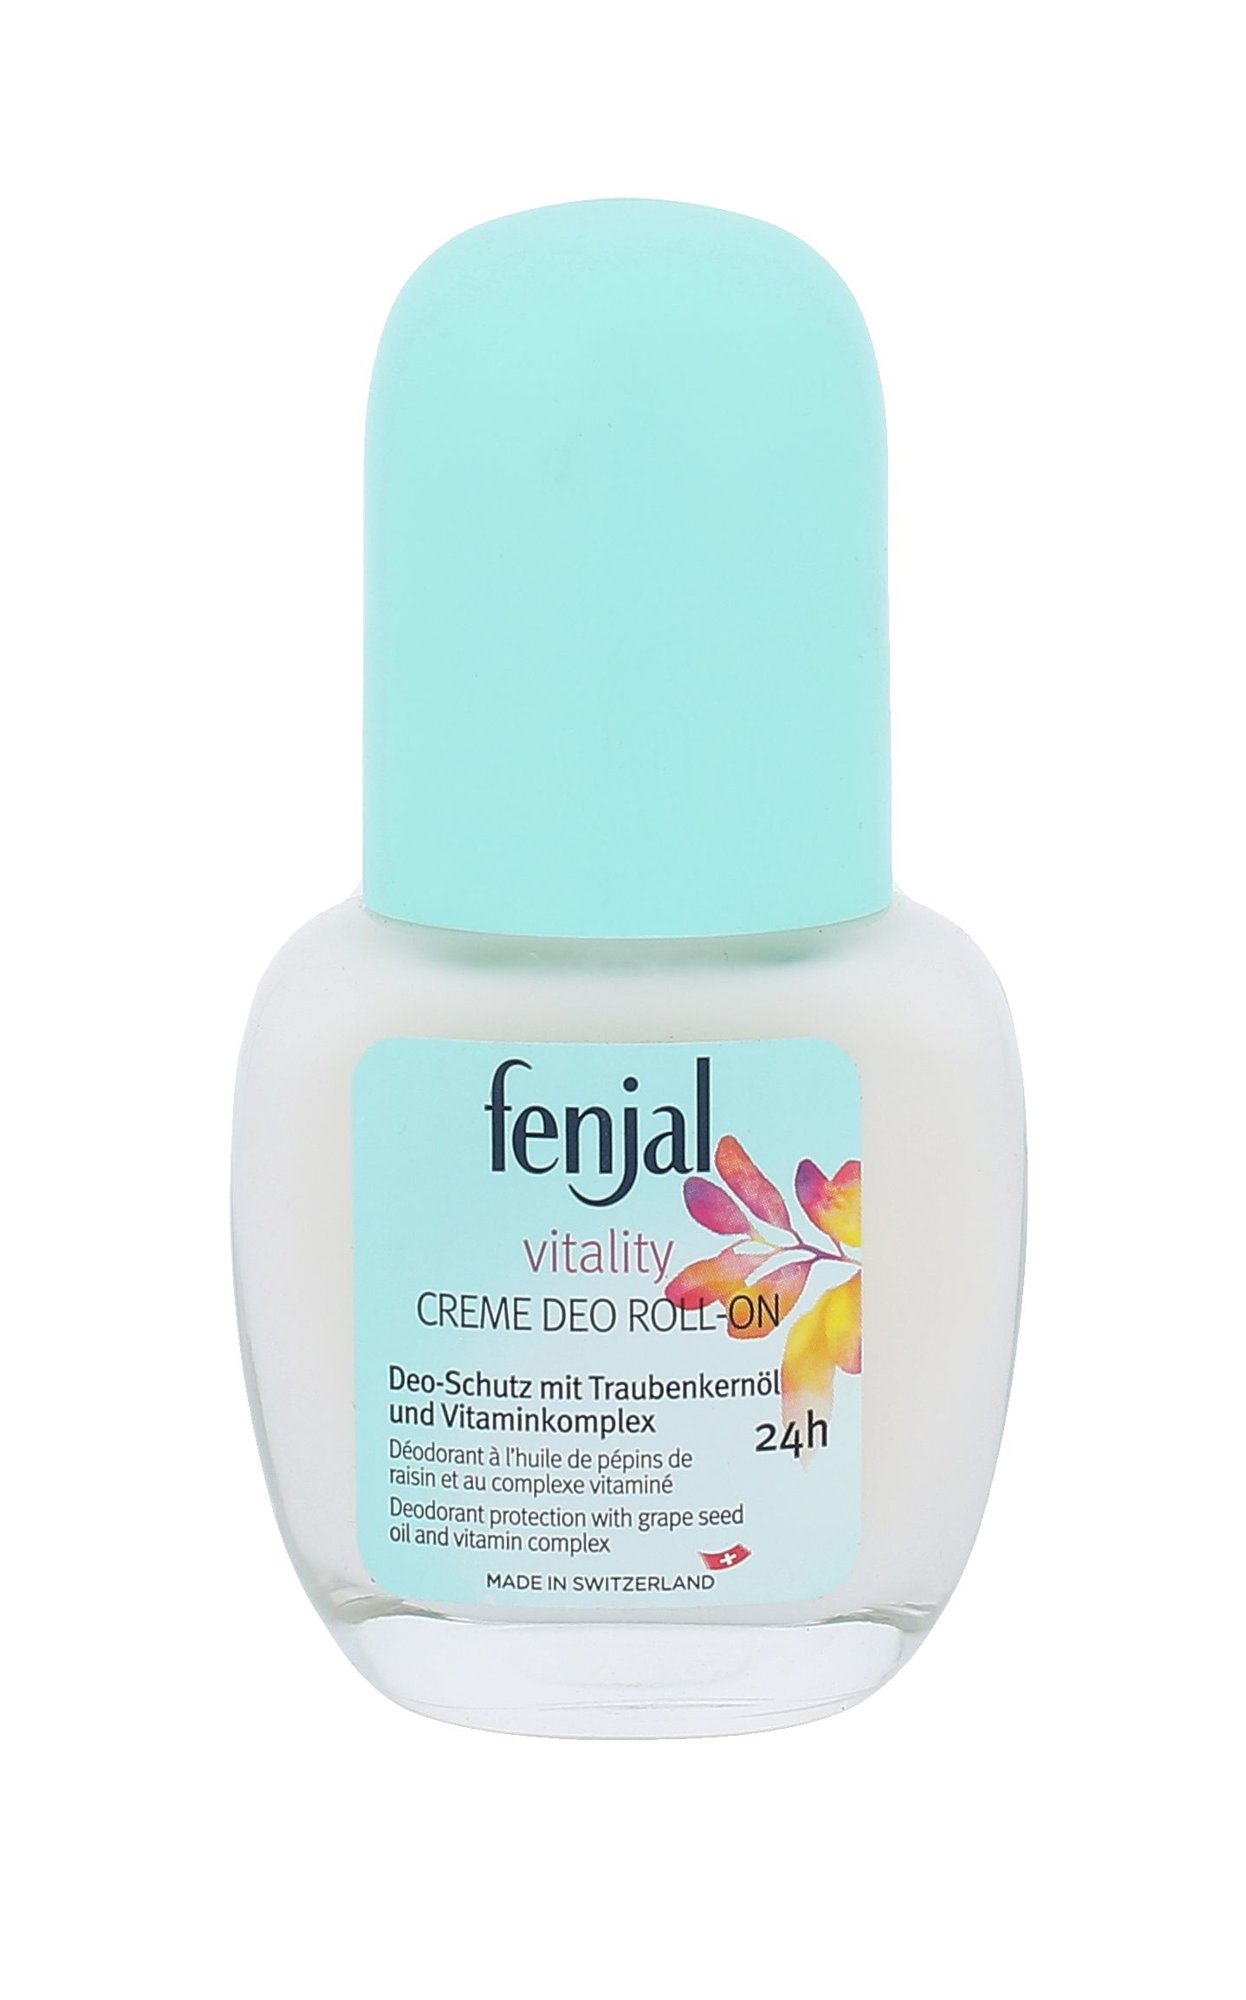 Fenjal Vitality Creme Deo Roll-On 24H